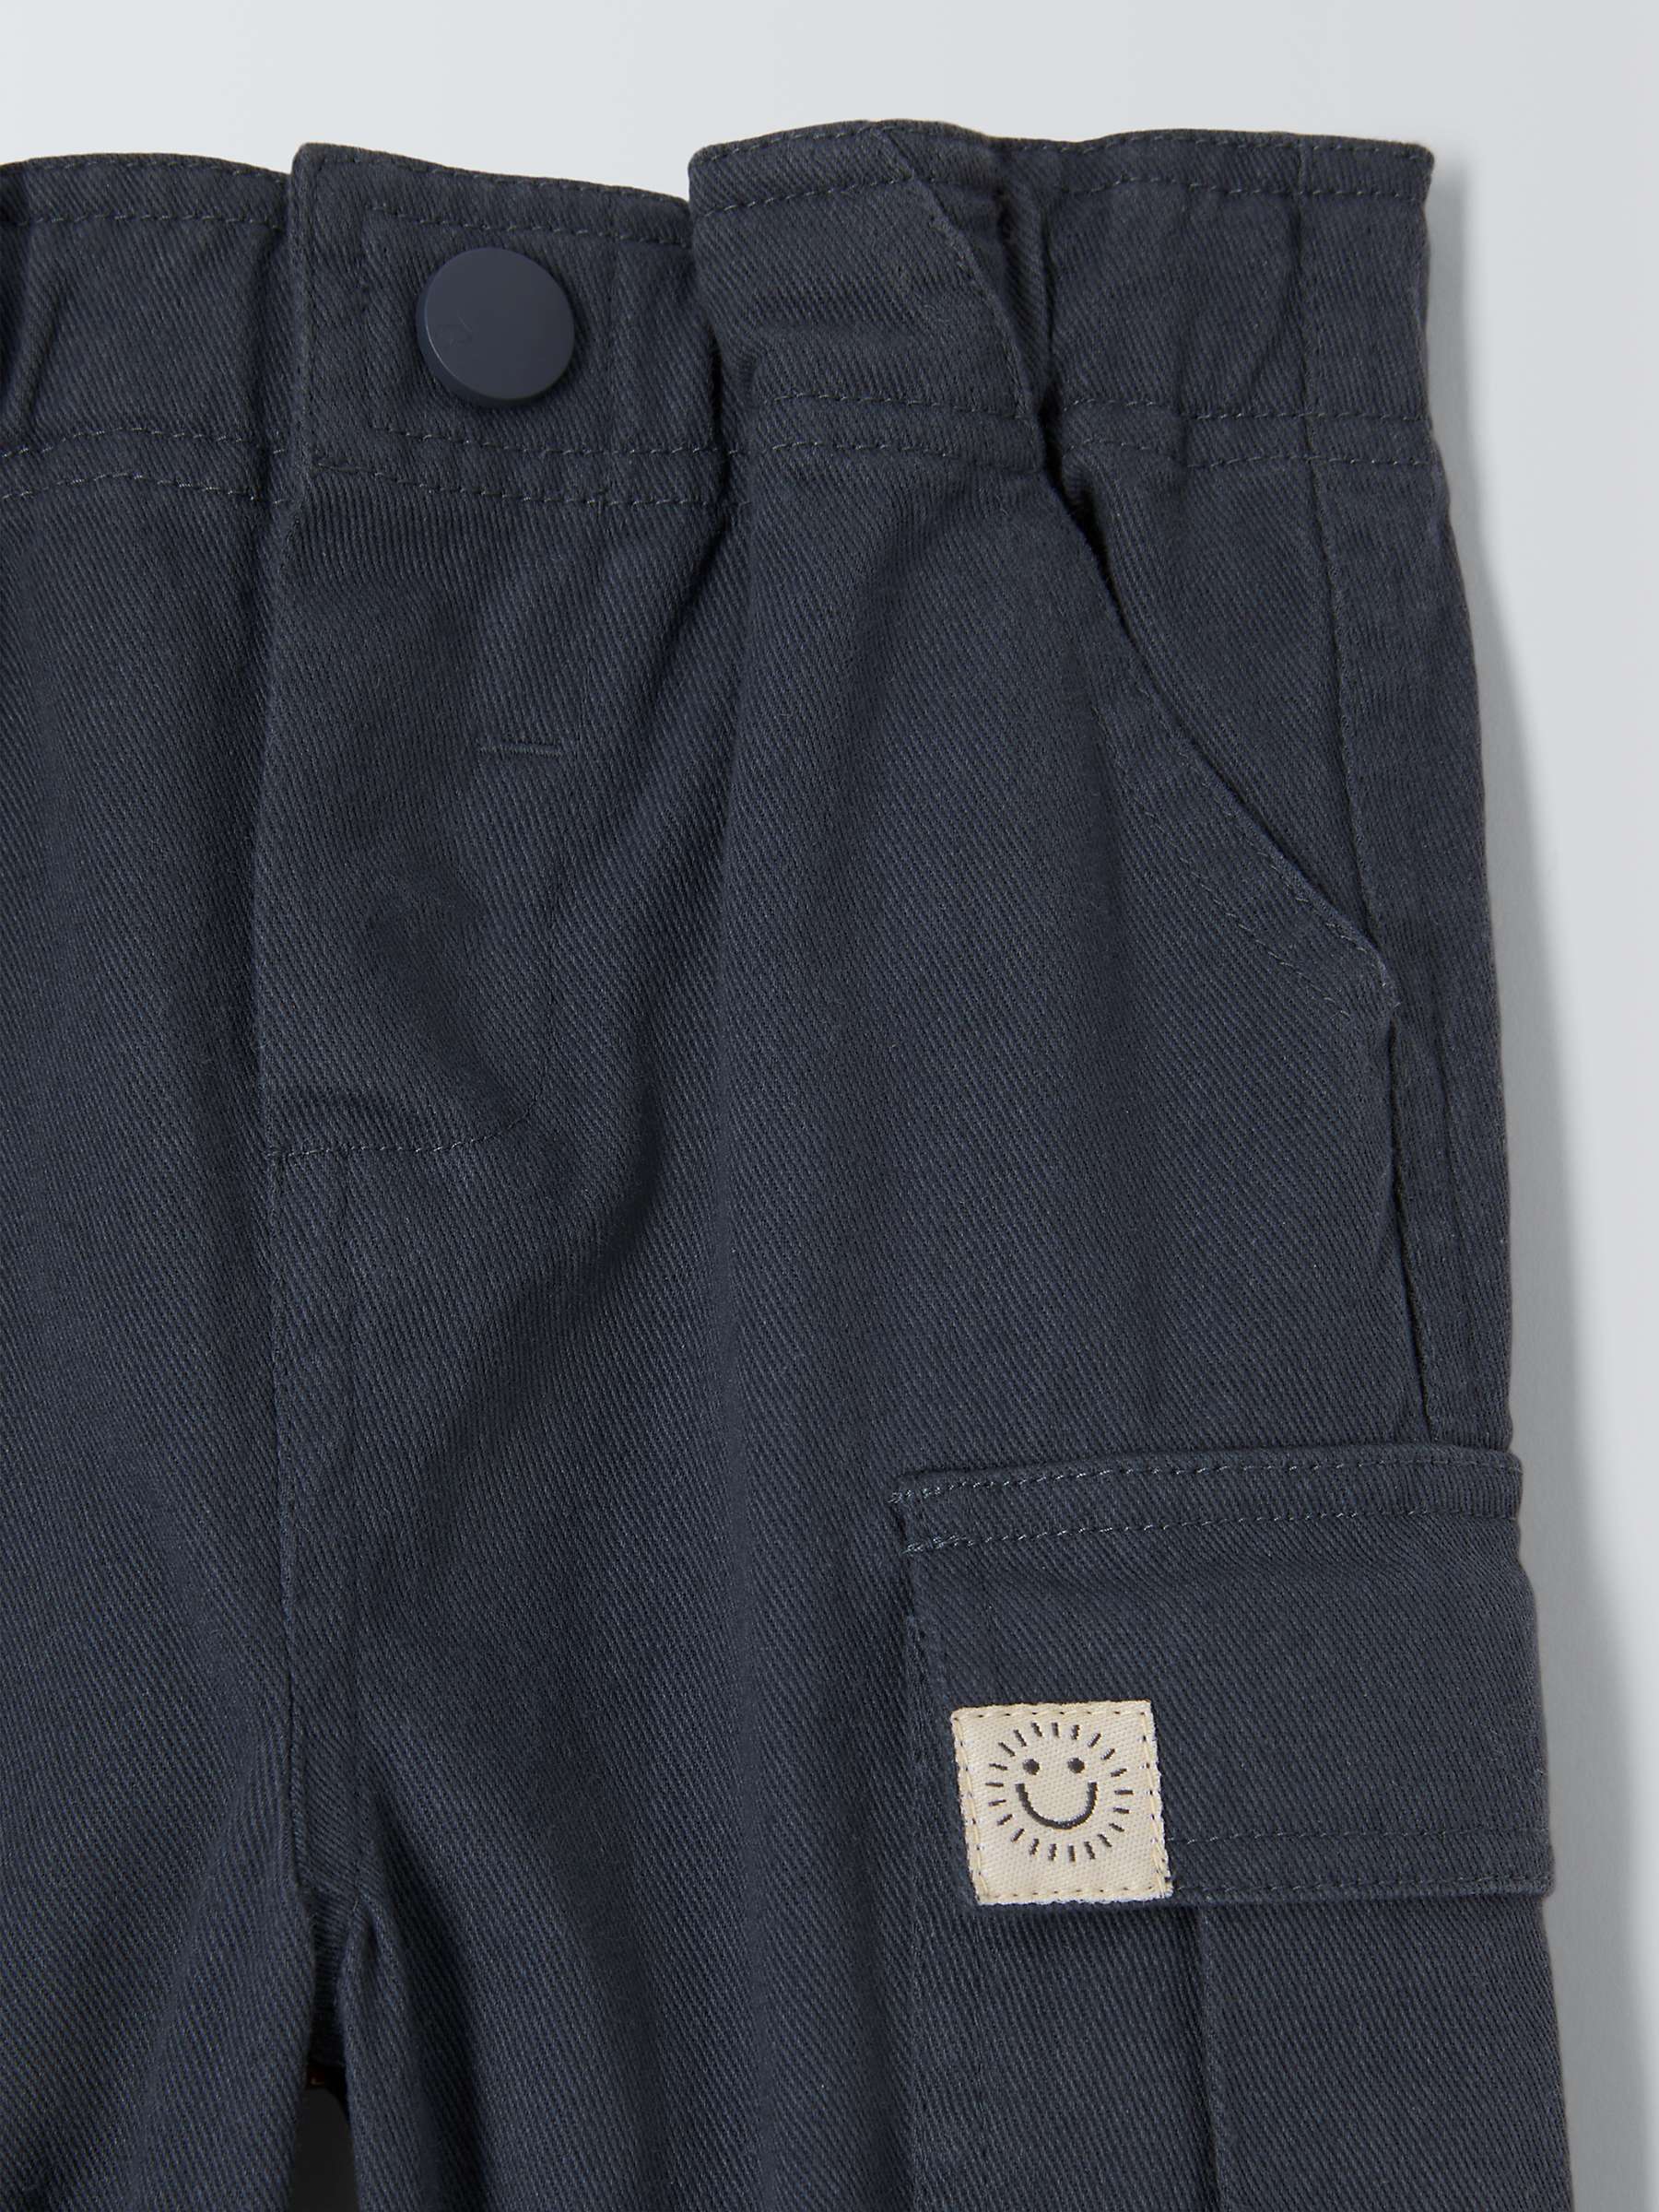 Buy John Lewis Baby Twill Cargo Trousers Online at johnlewis.com